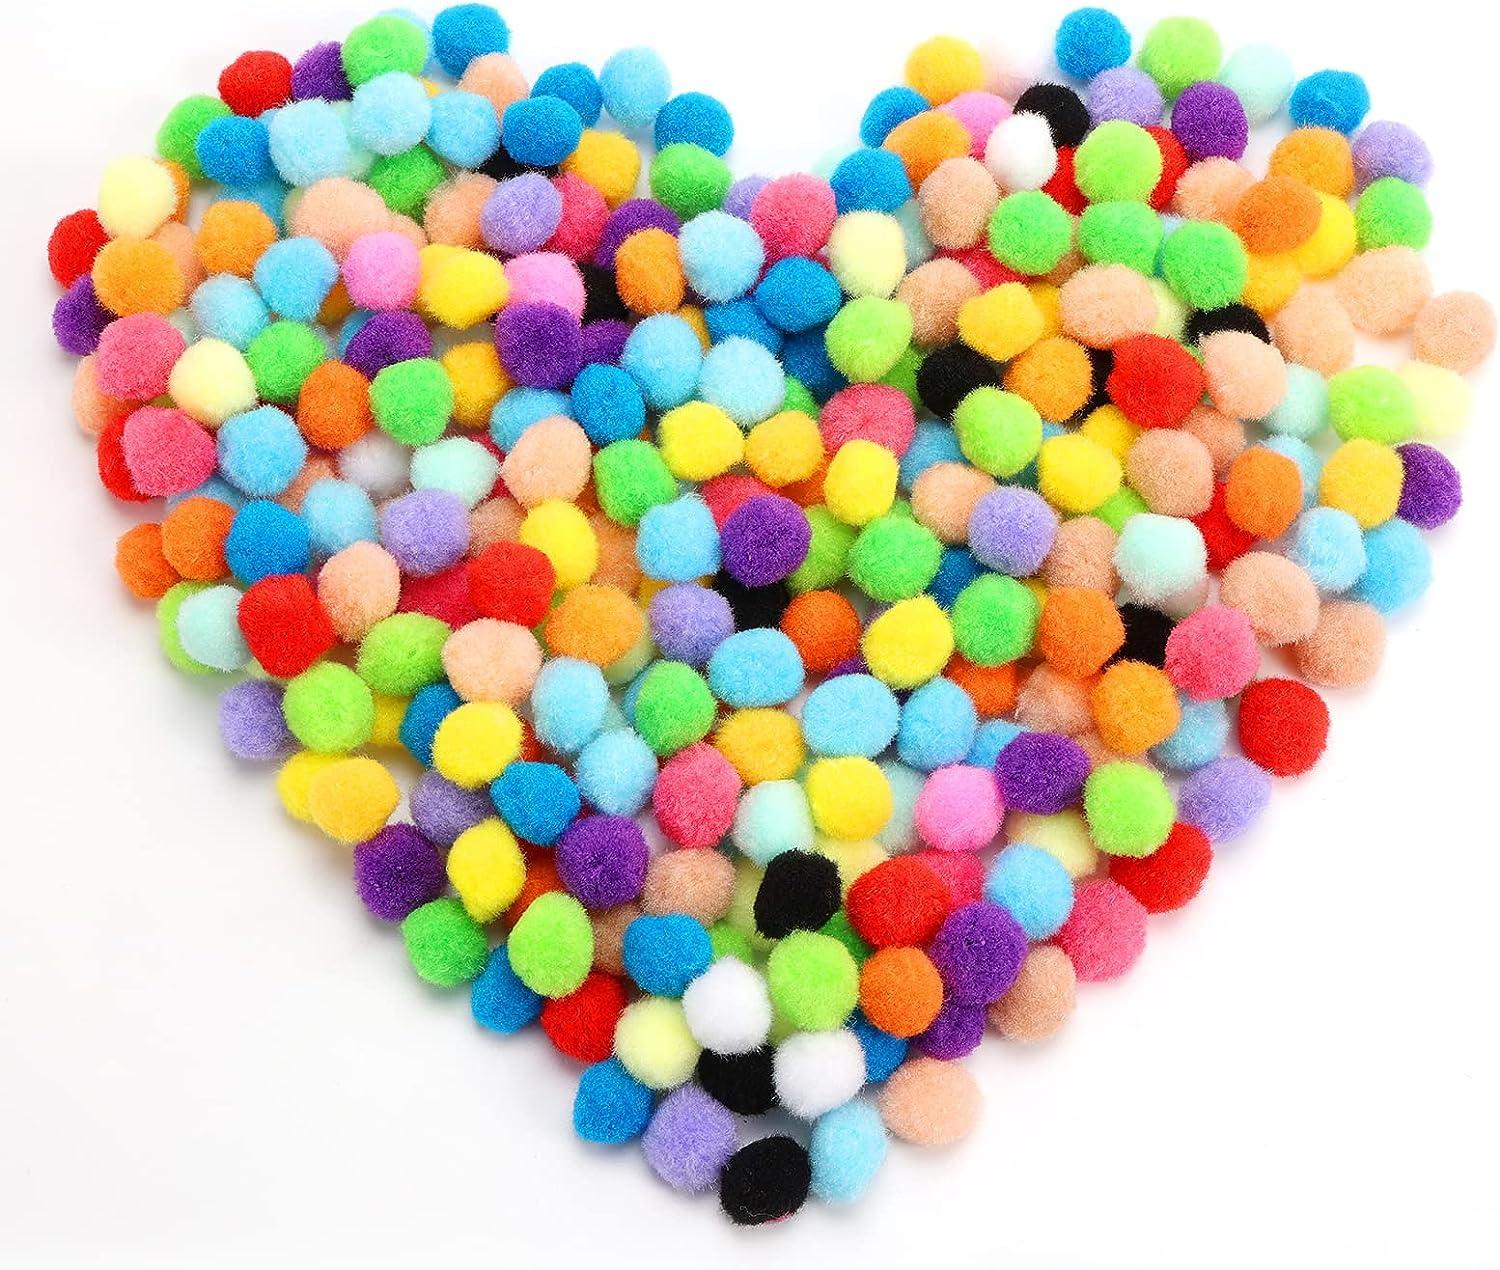 Aoibrloy 450 Pcs 300PCS 1Inch Pom Poms with 150PCS Wiggle Eyes Multicolor Craft  Pom Pom Balls for Kids DIY Arts and Crafts Projects and Decorations  300PCS-1inch